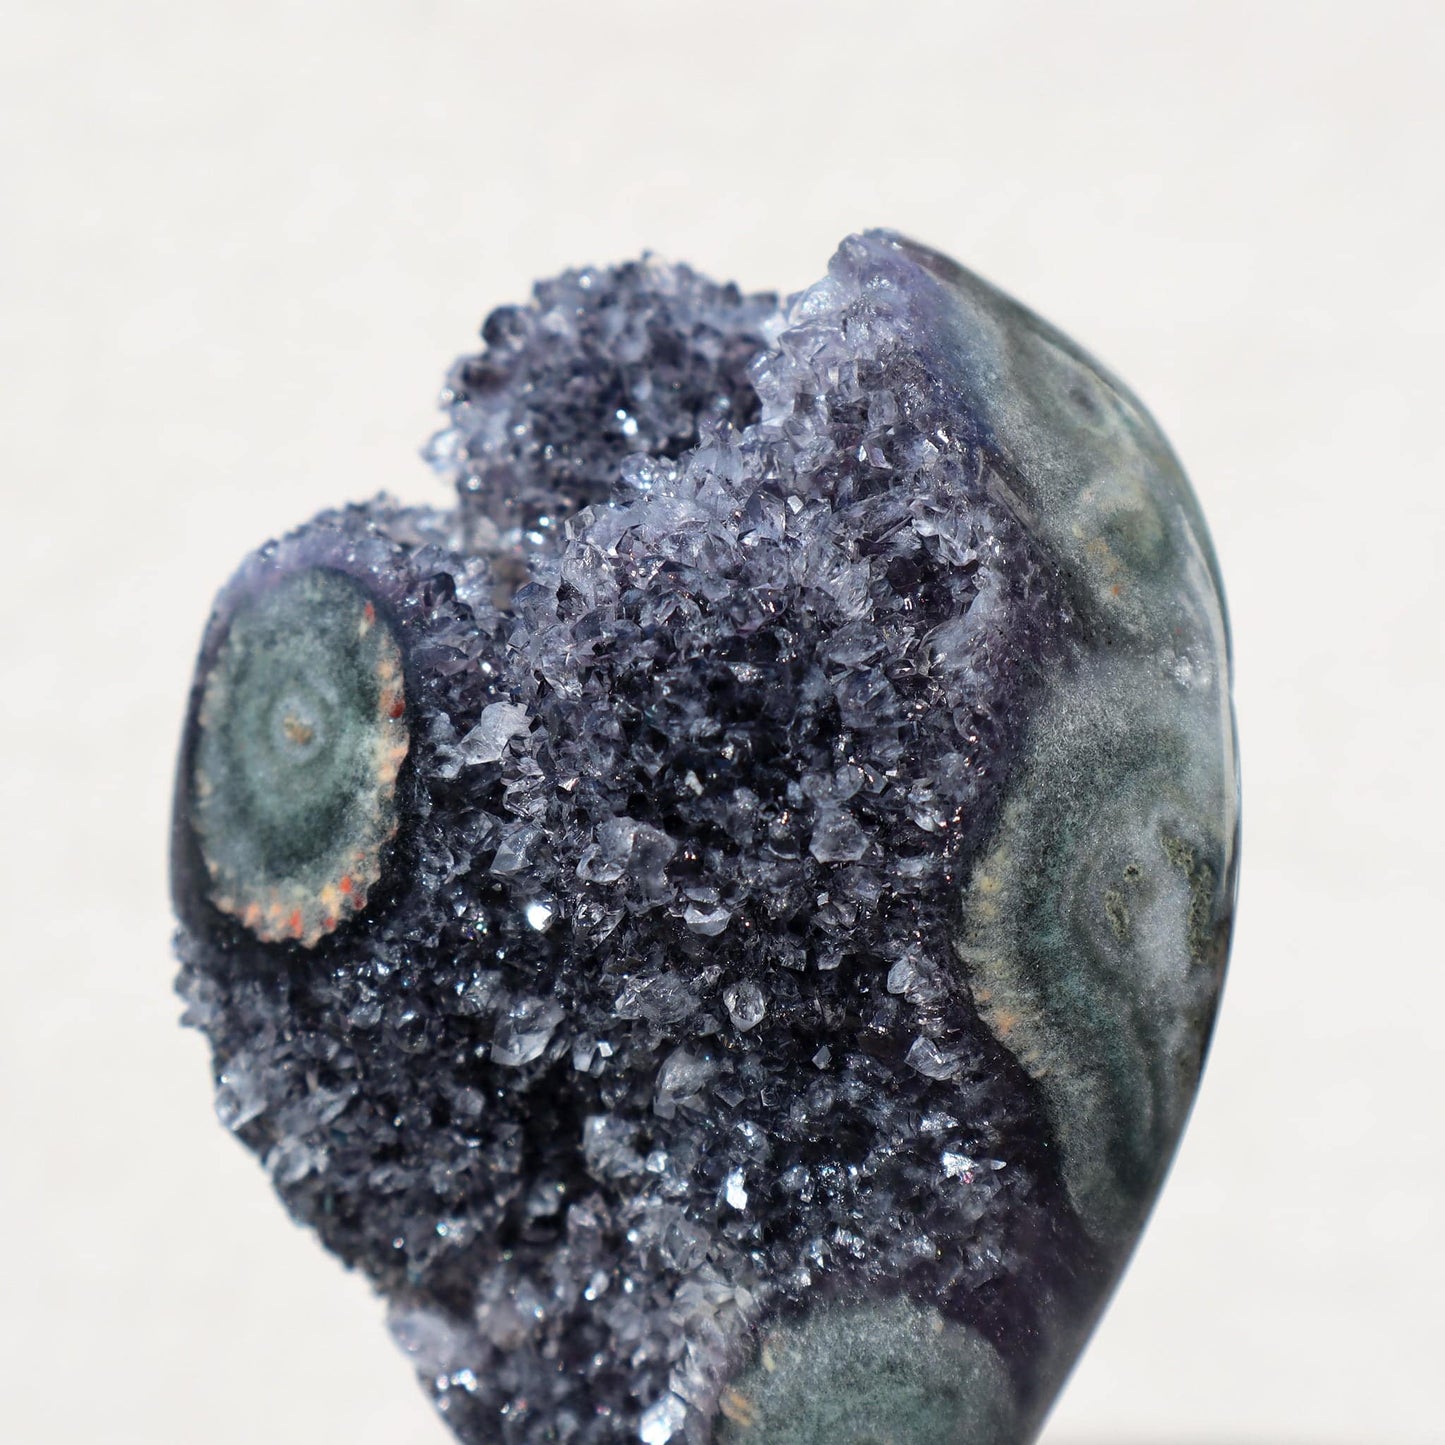 SINGLE EYE stalactite rare amethyst on stand for sale